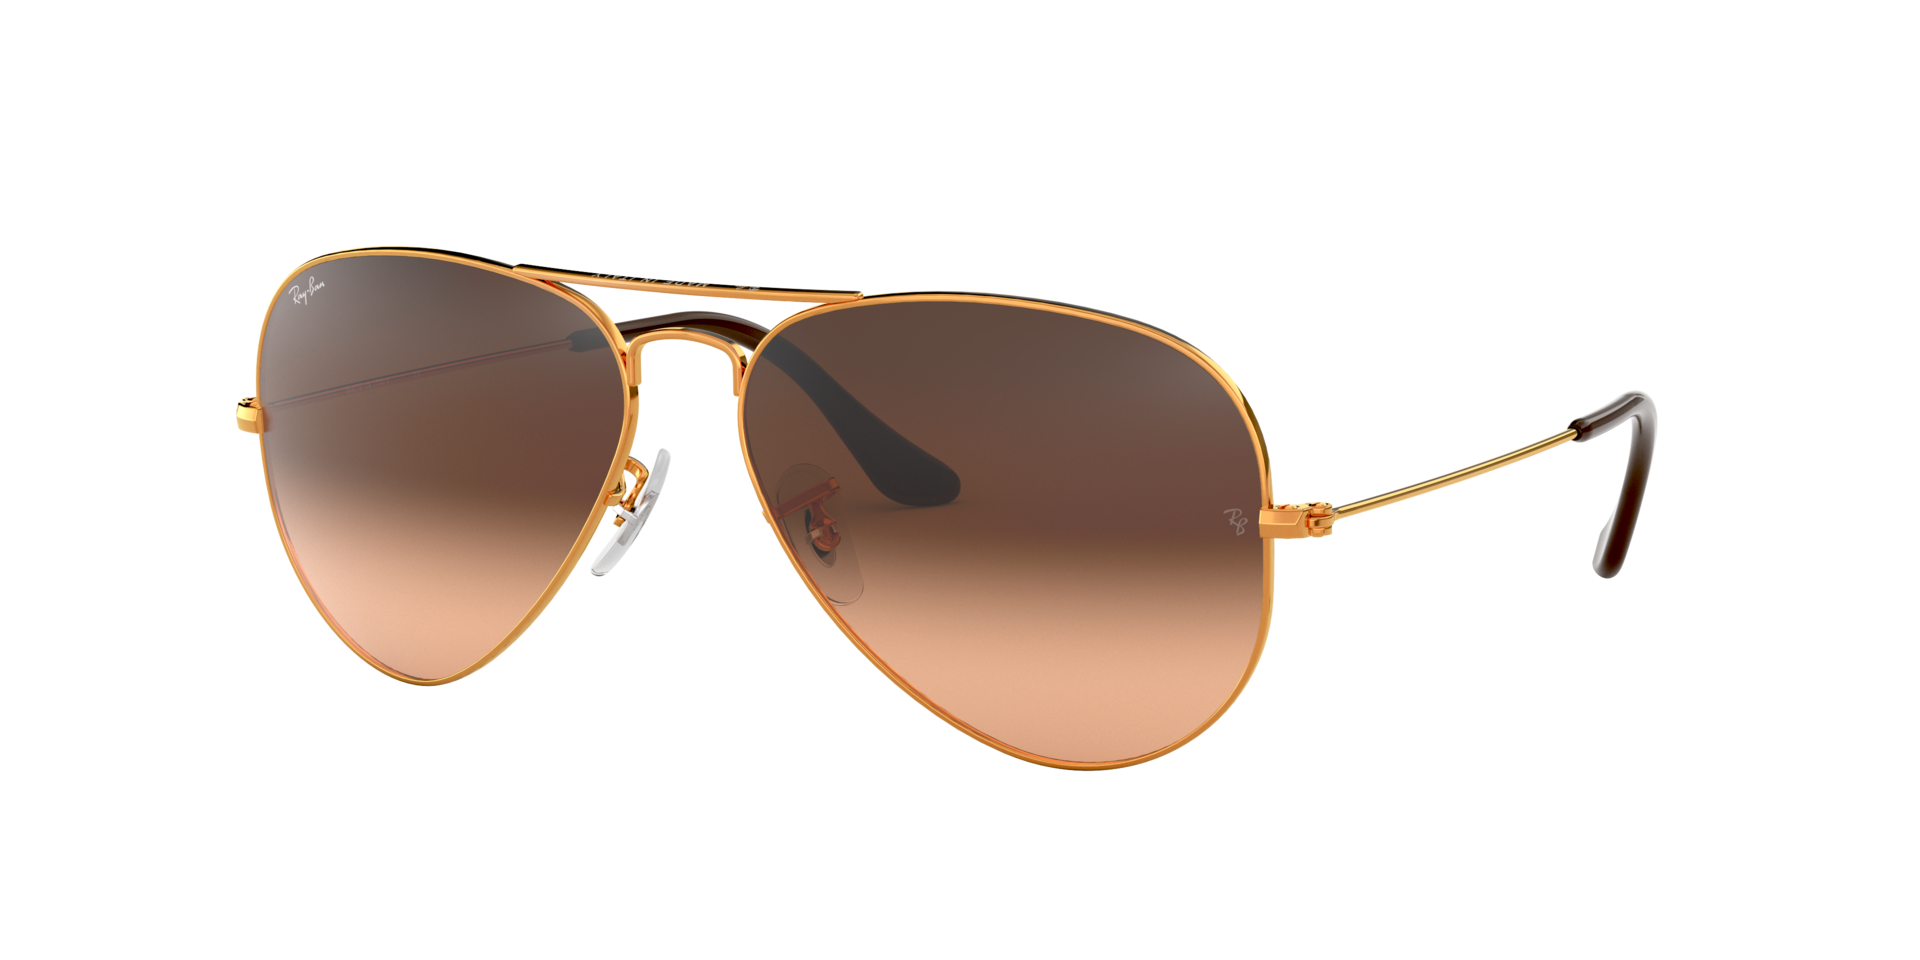 Ray-Ban Aviator Large Metal Sonnenbrille RB3025 9001/A5 55